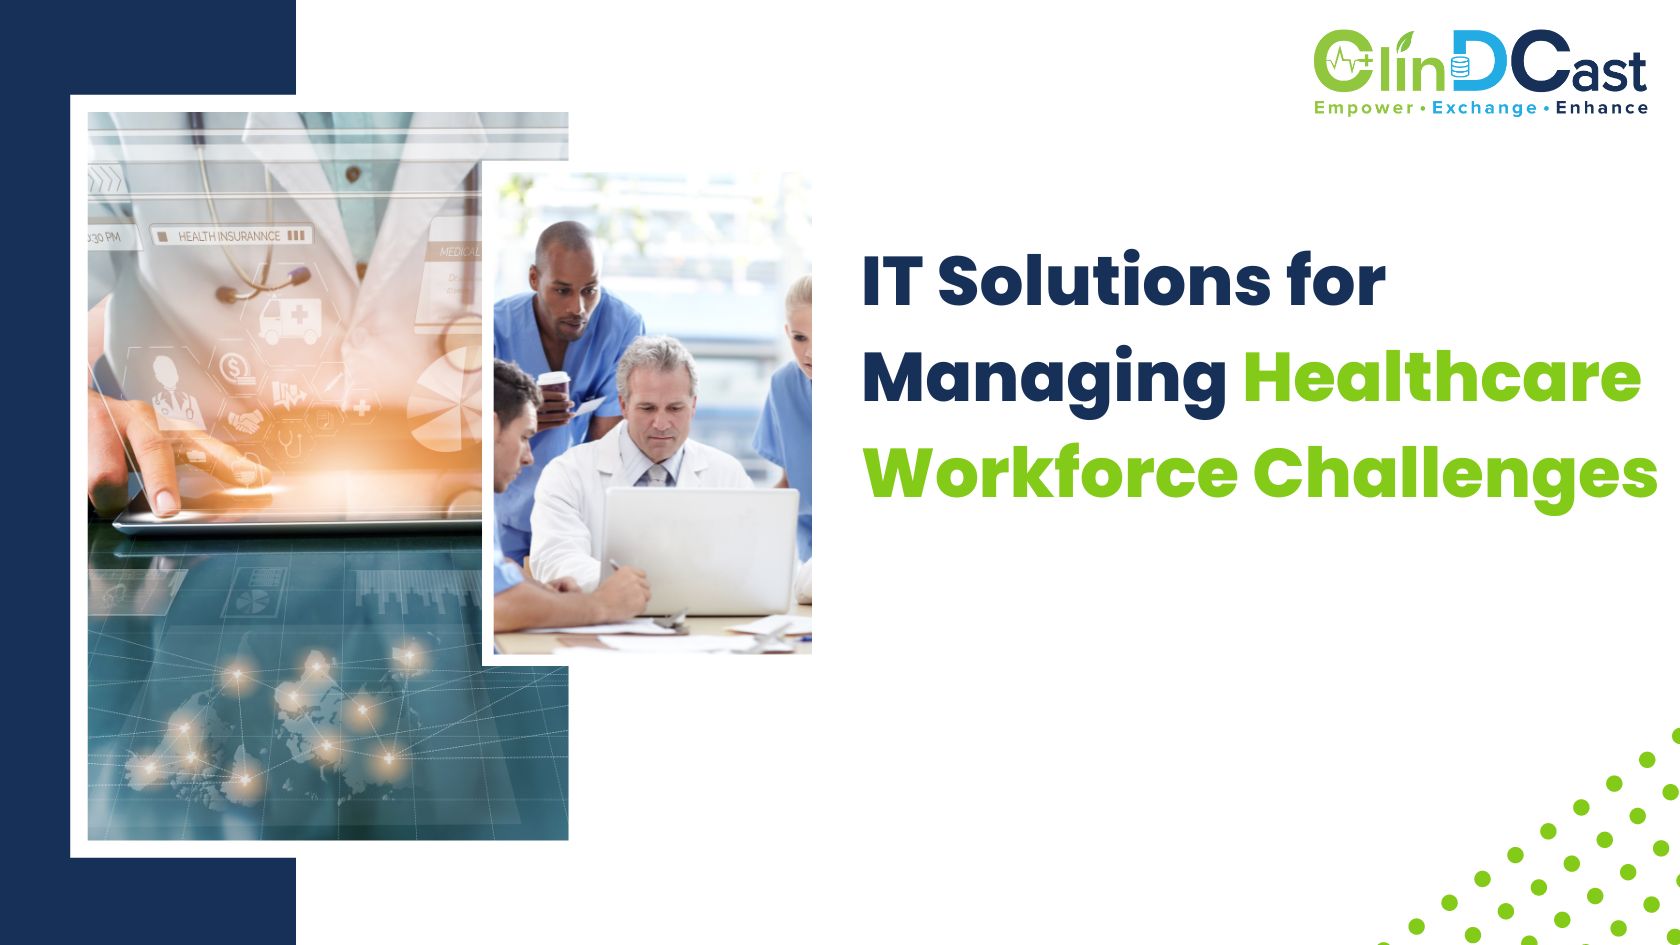 IT Solutions for Managing Healthcare Workforce Challenges